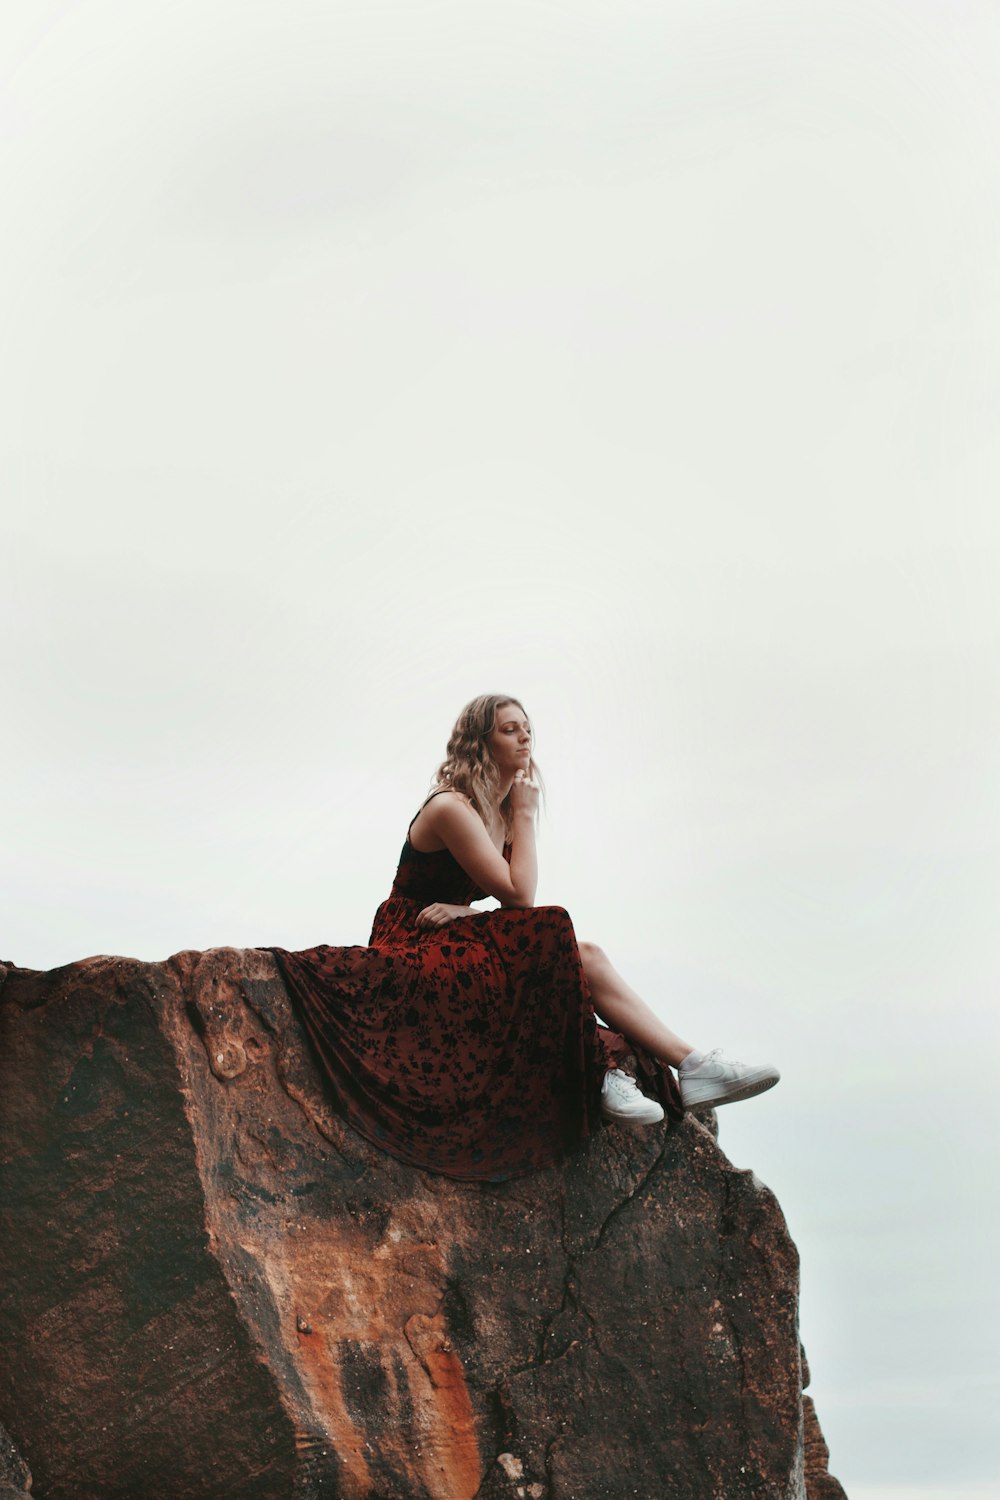 woman in black and red floral dress sitting on rock